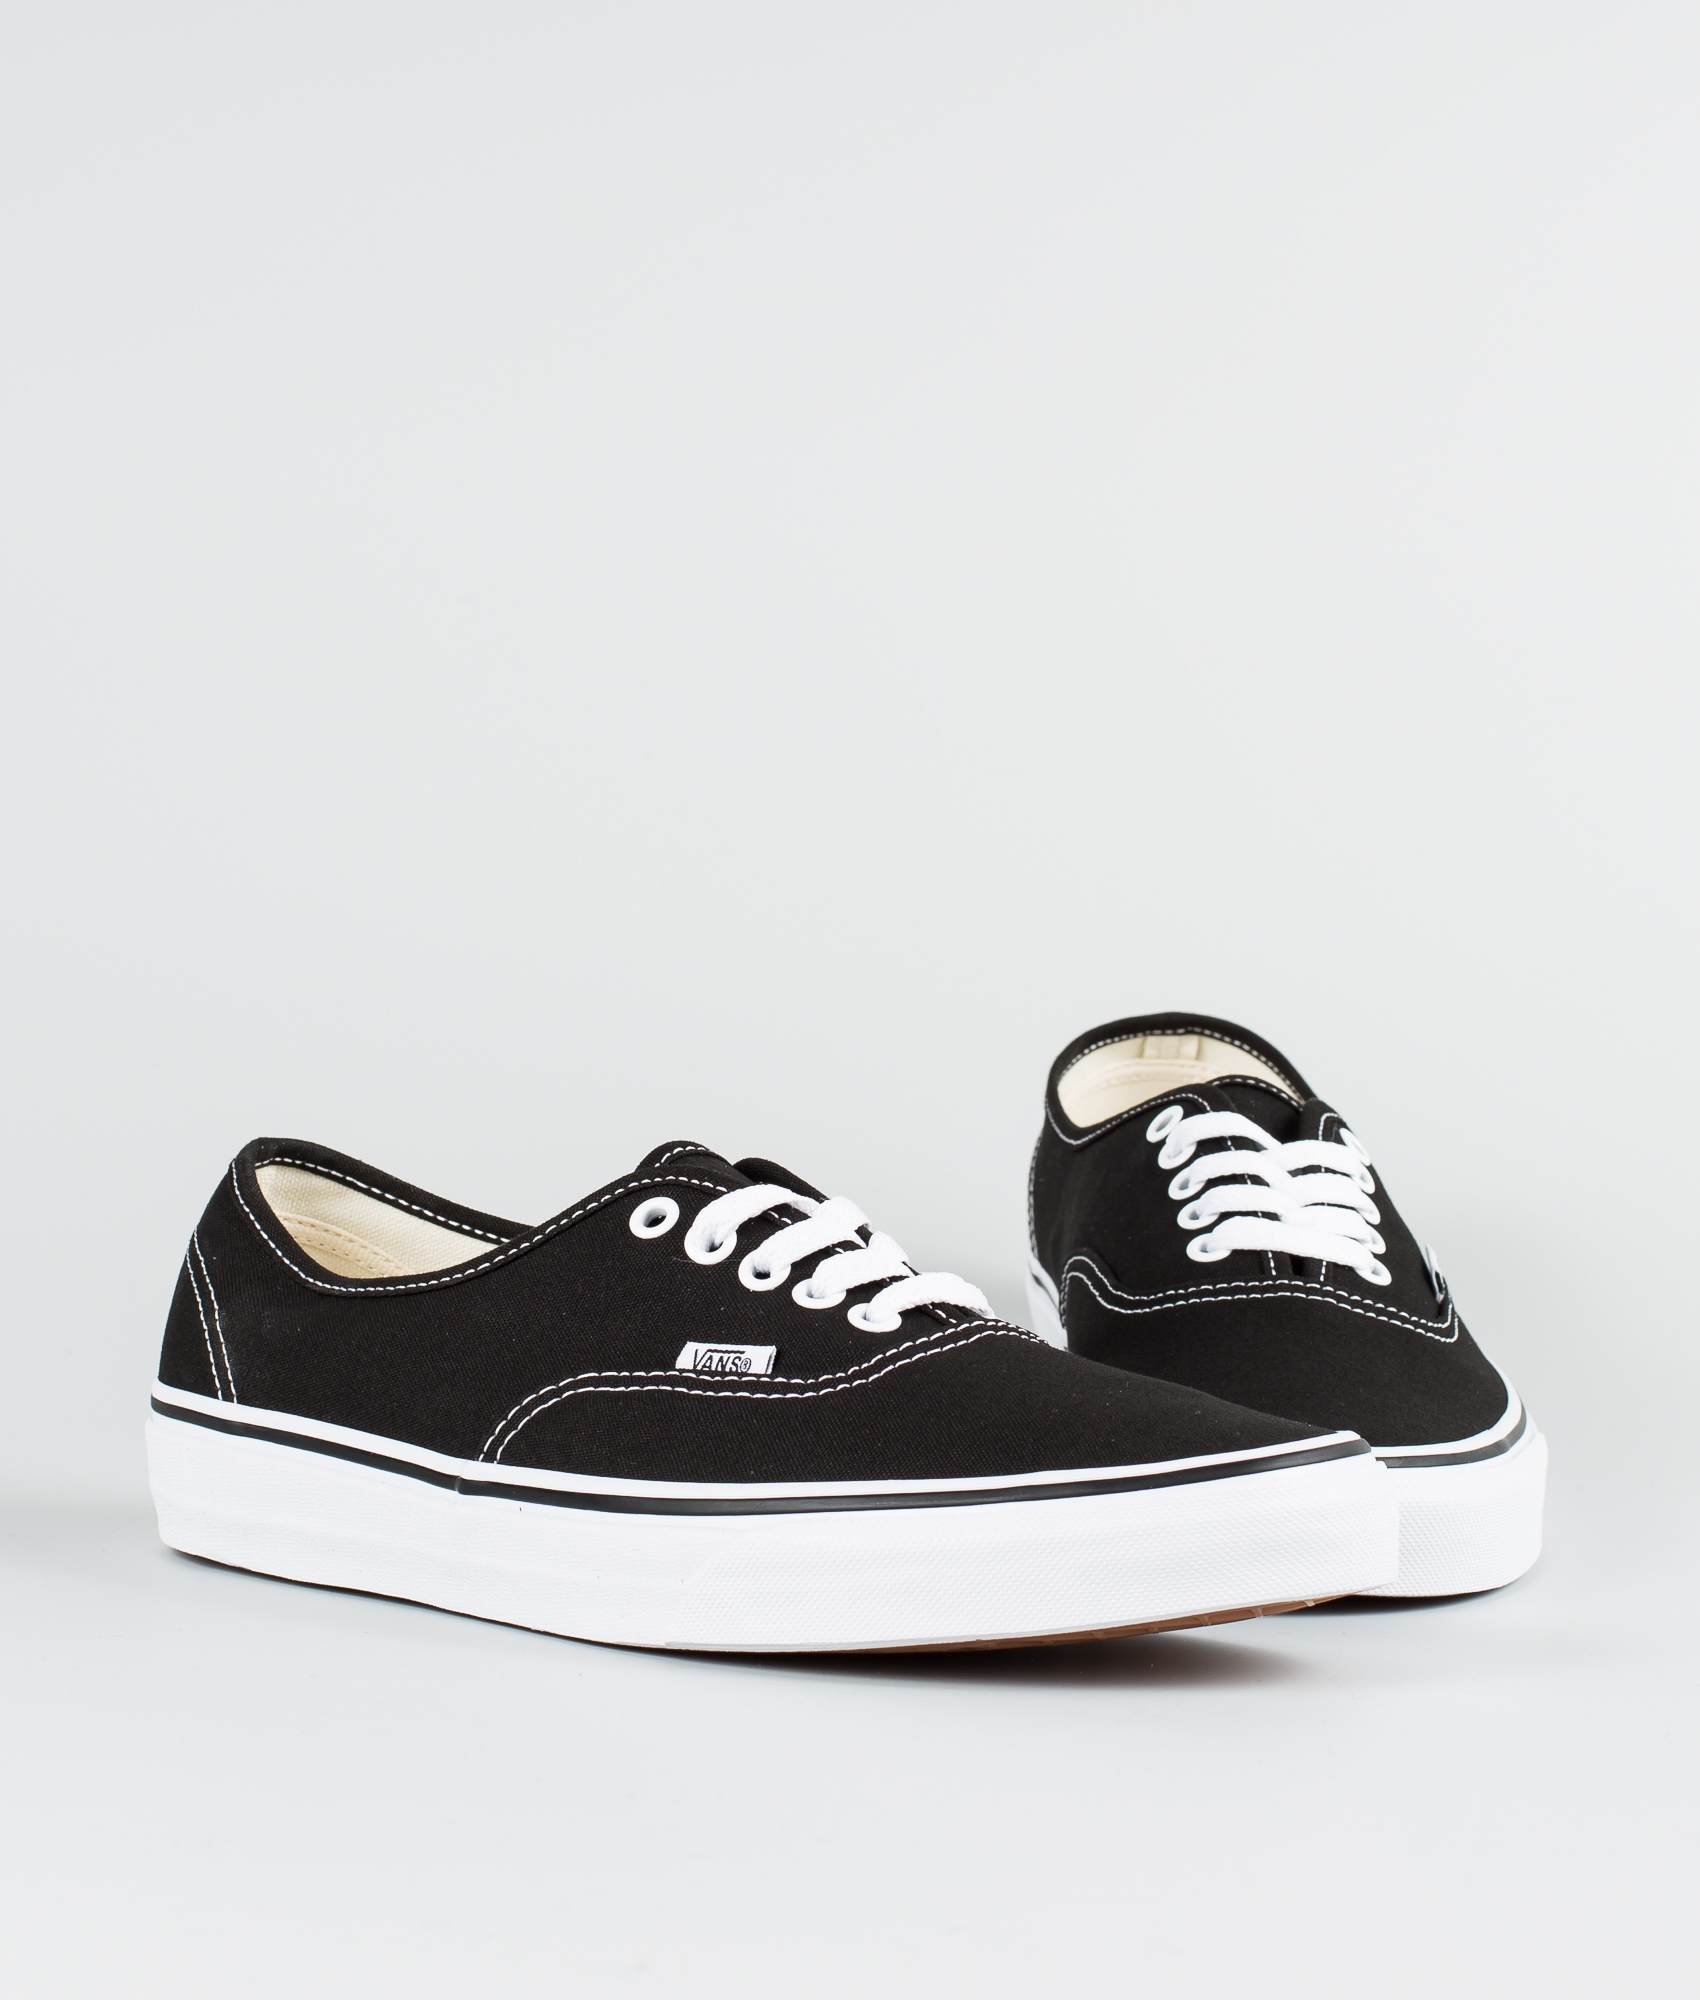 vans authentic shoes black and white